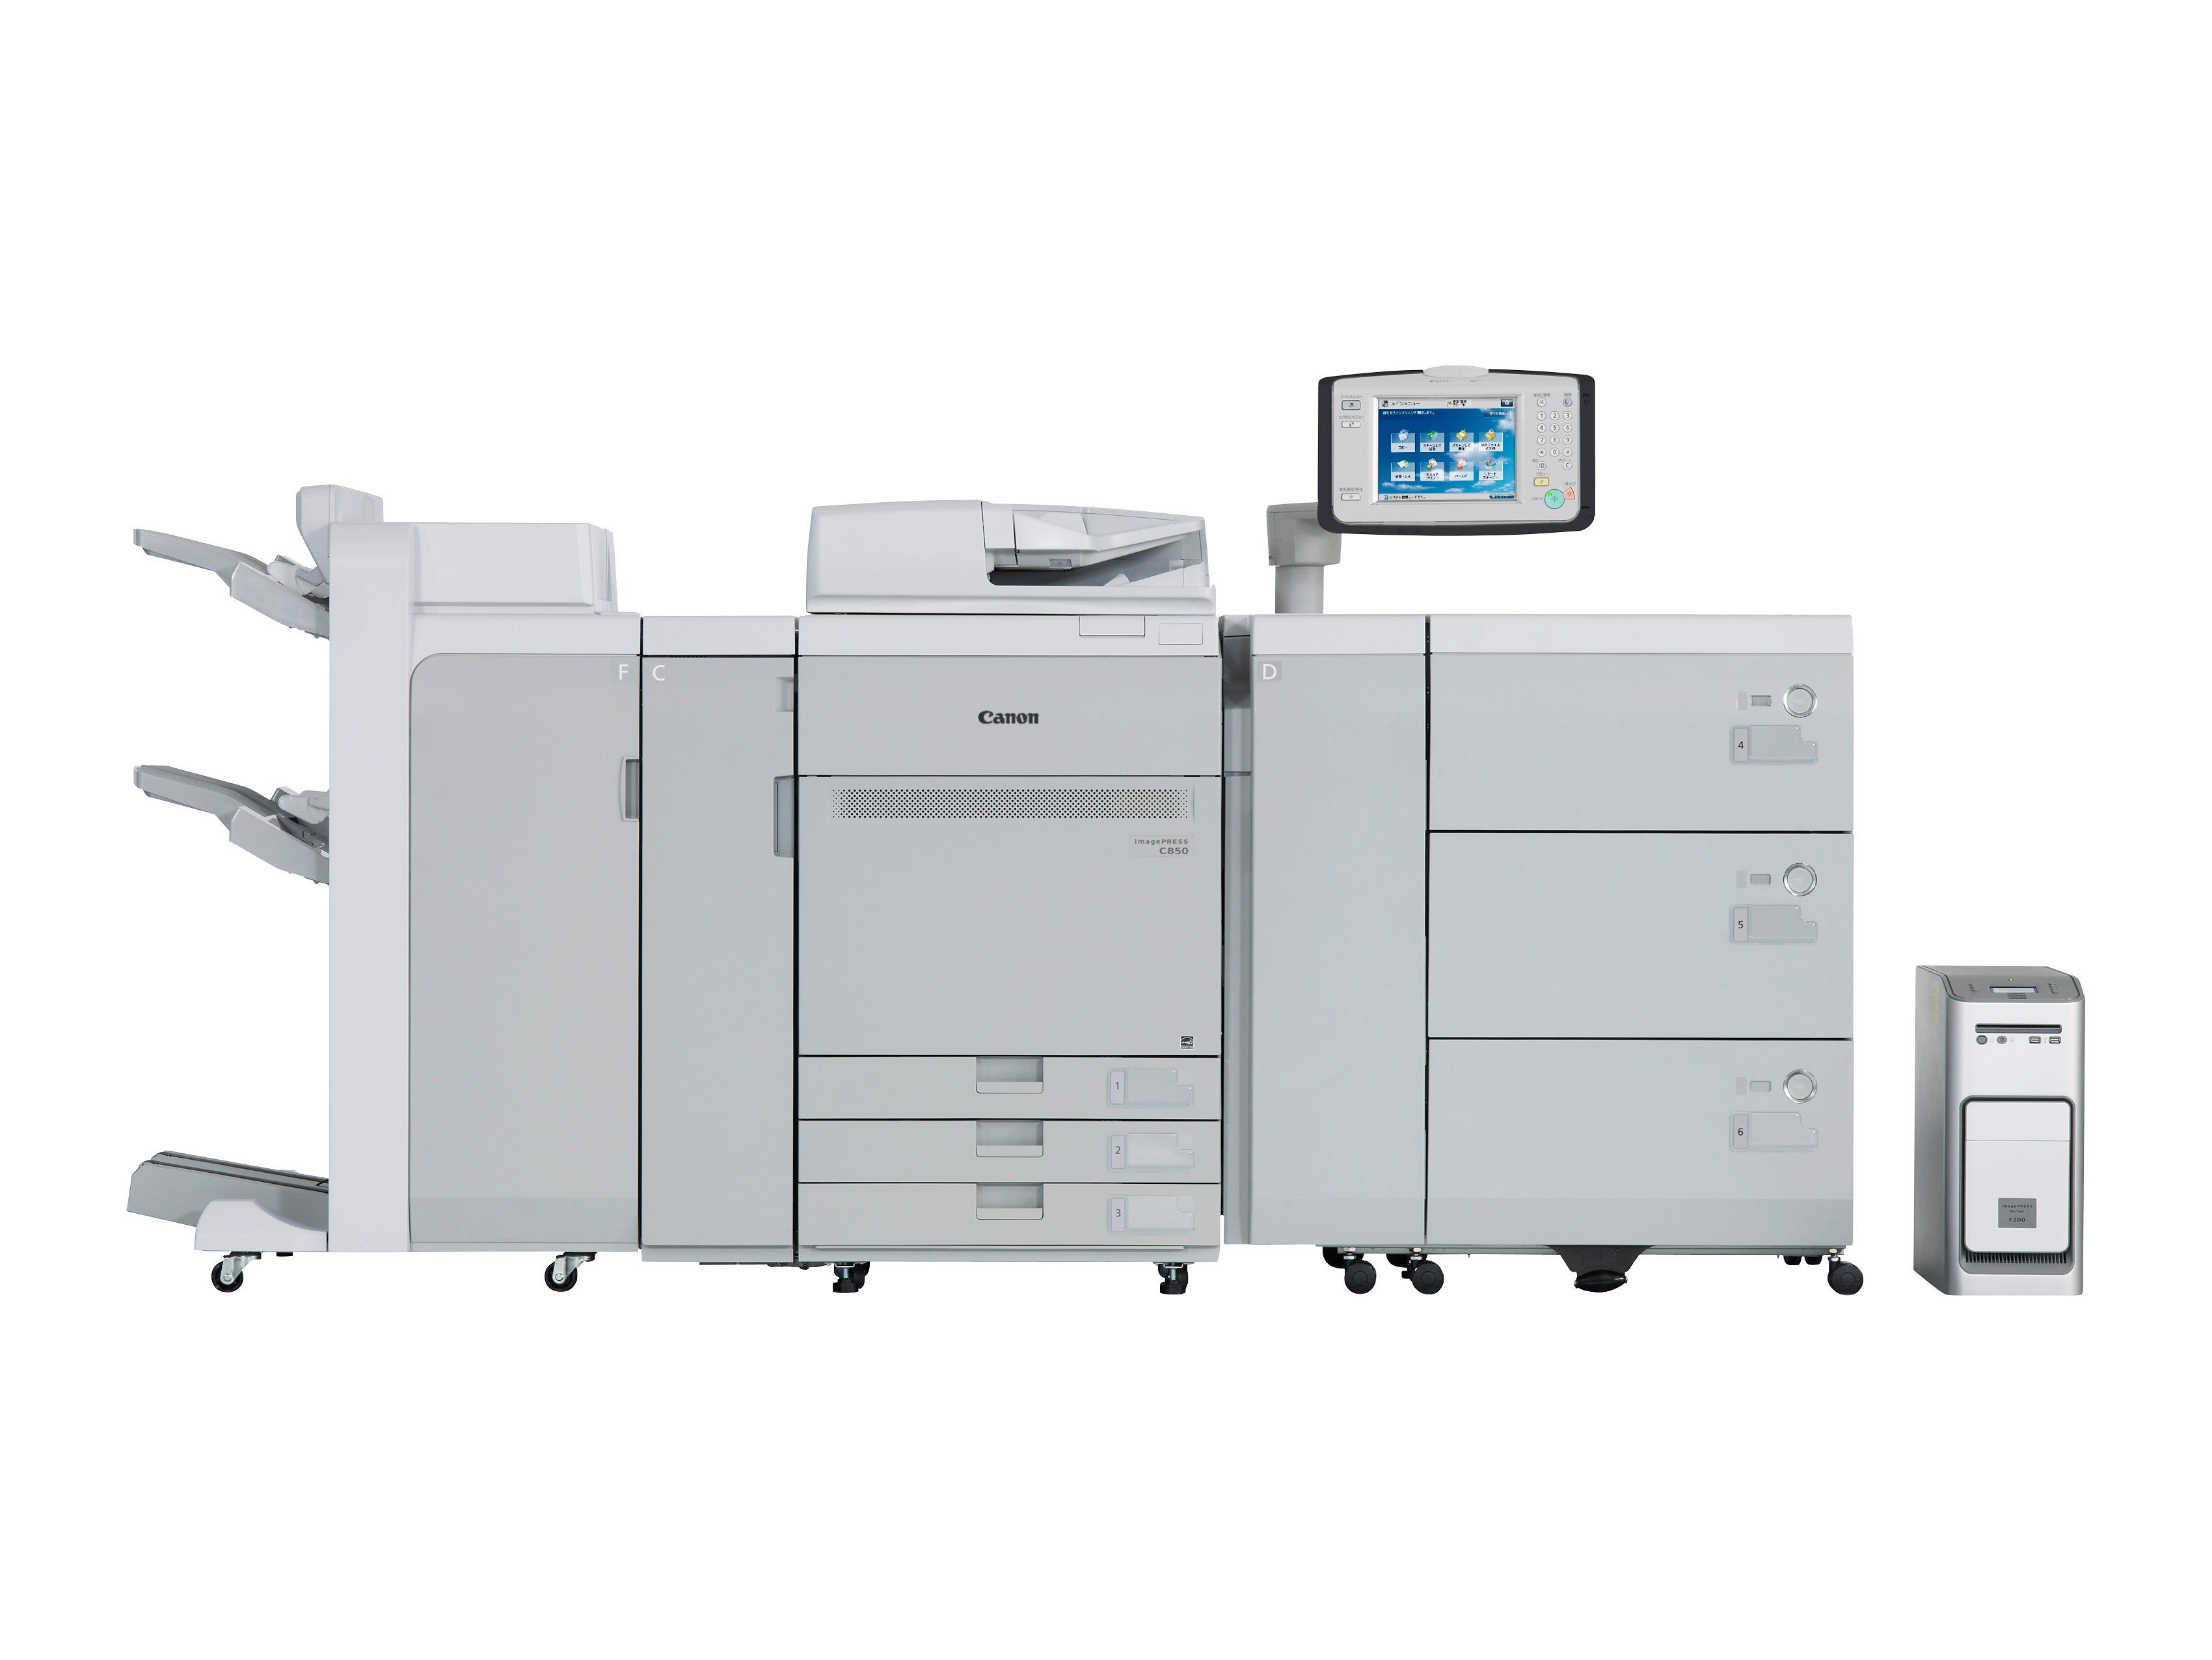 2023 Guide to Optimizing Print Quality Tips for Canon Printer Users